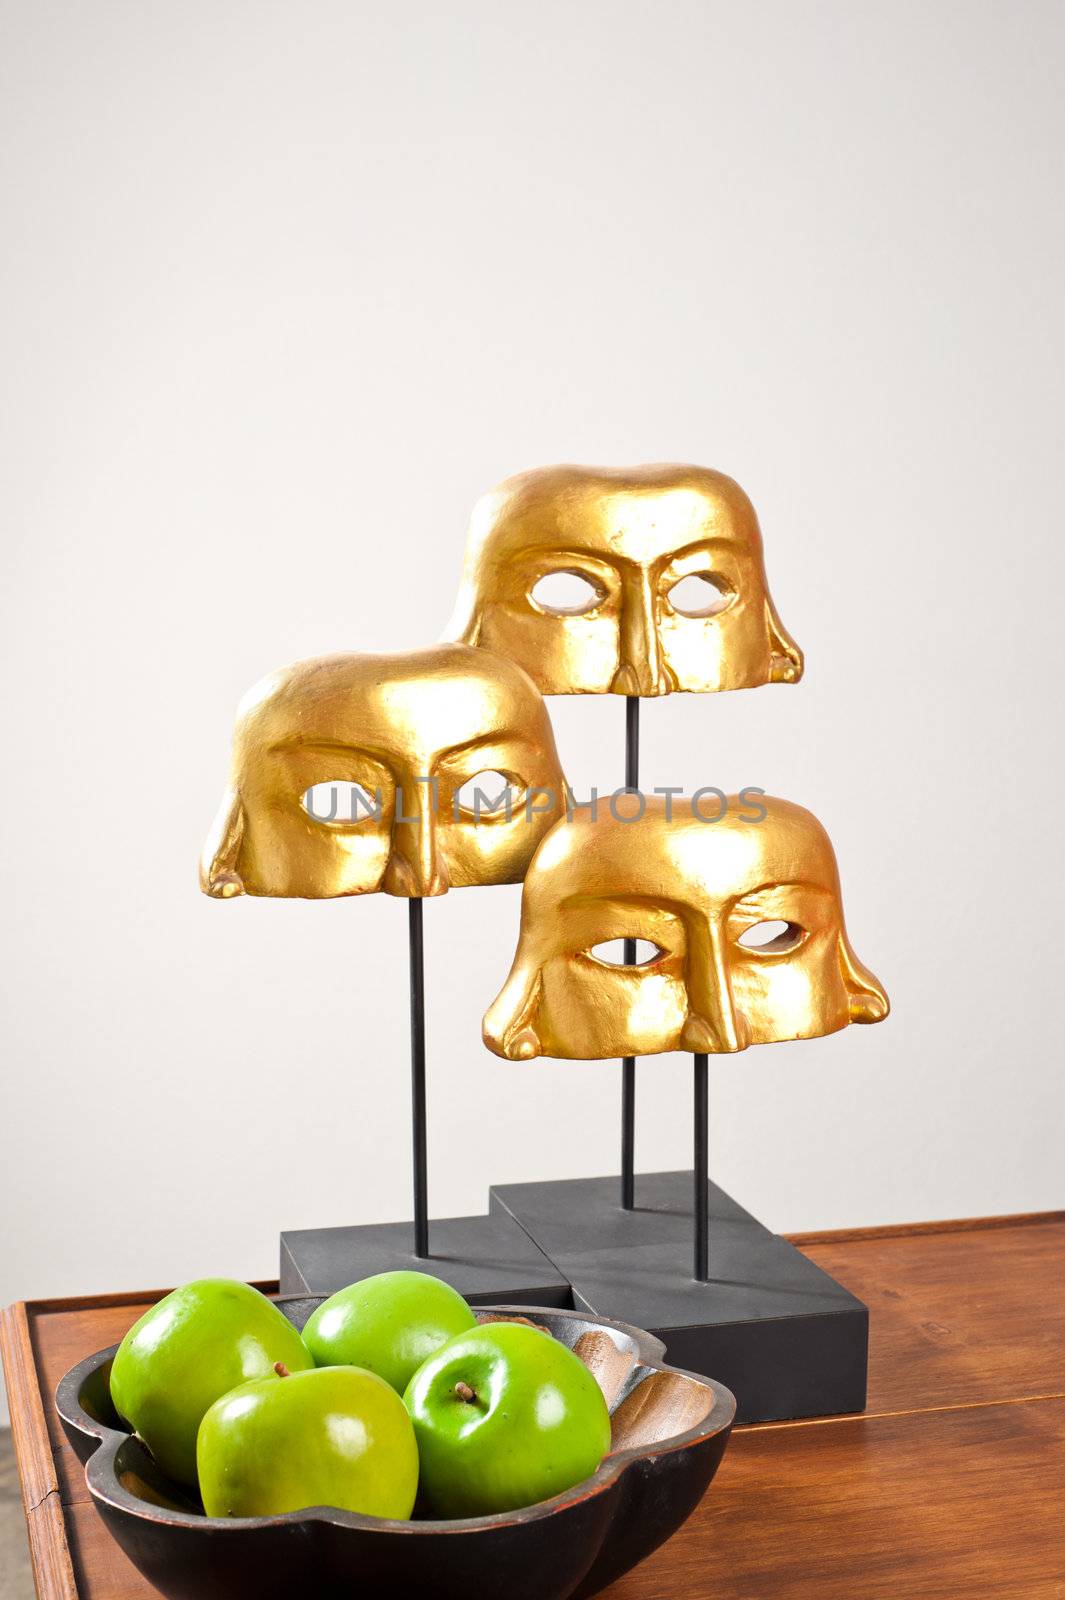 Golden masks as interior decoration on wooden table